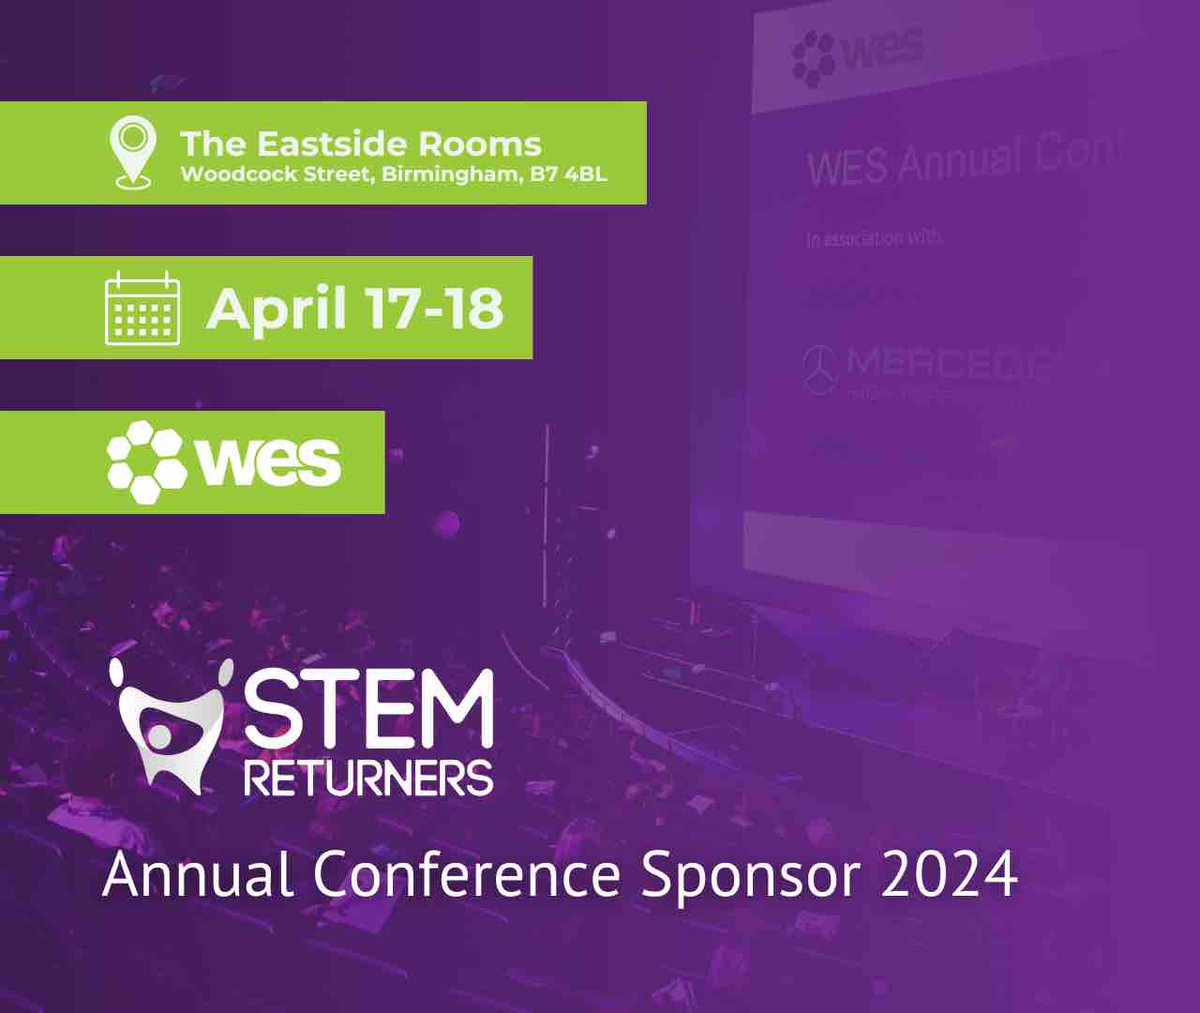 We are thrilled to announce that our partner, STEMReturners is joining us as a Sponsor at our #WESAnnualConference! Book now: ow.ly/nSre50R4sbn , to hear how they are helping STEM professionals return to industry after a career break. #WES #STEMReturners